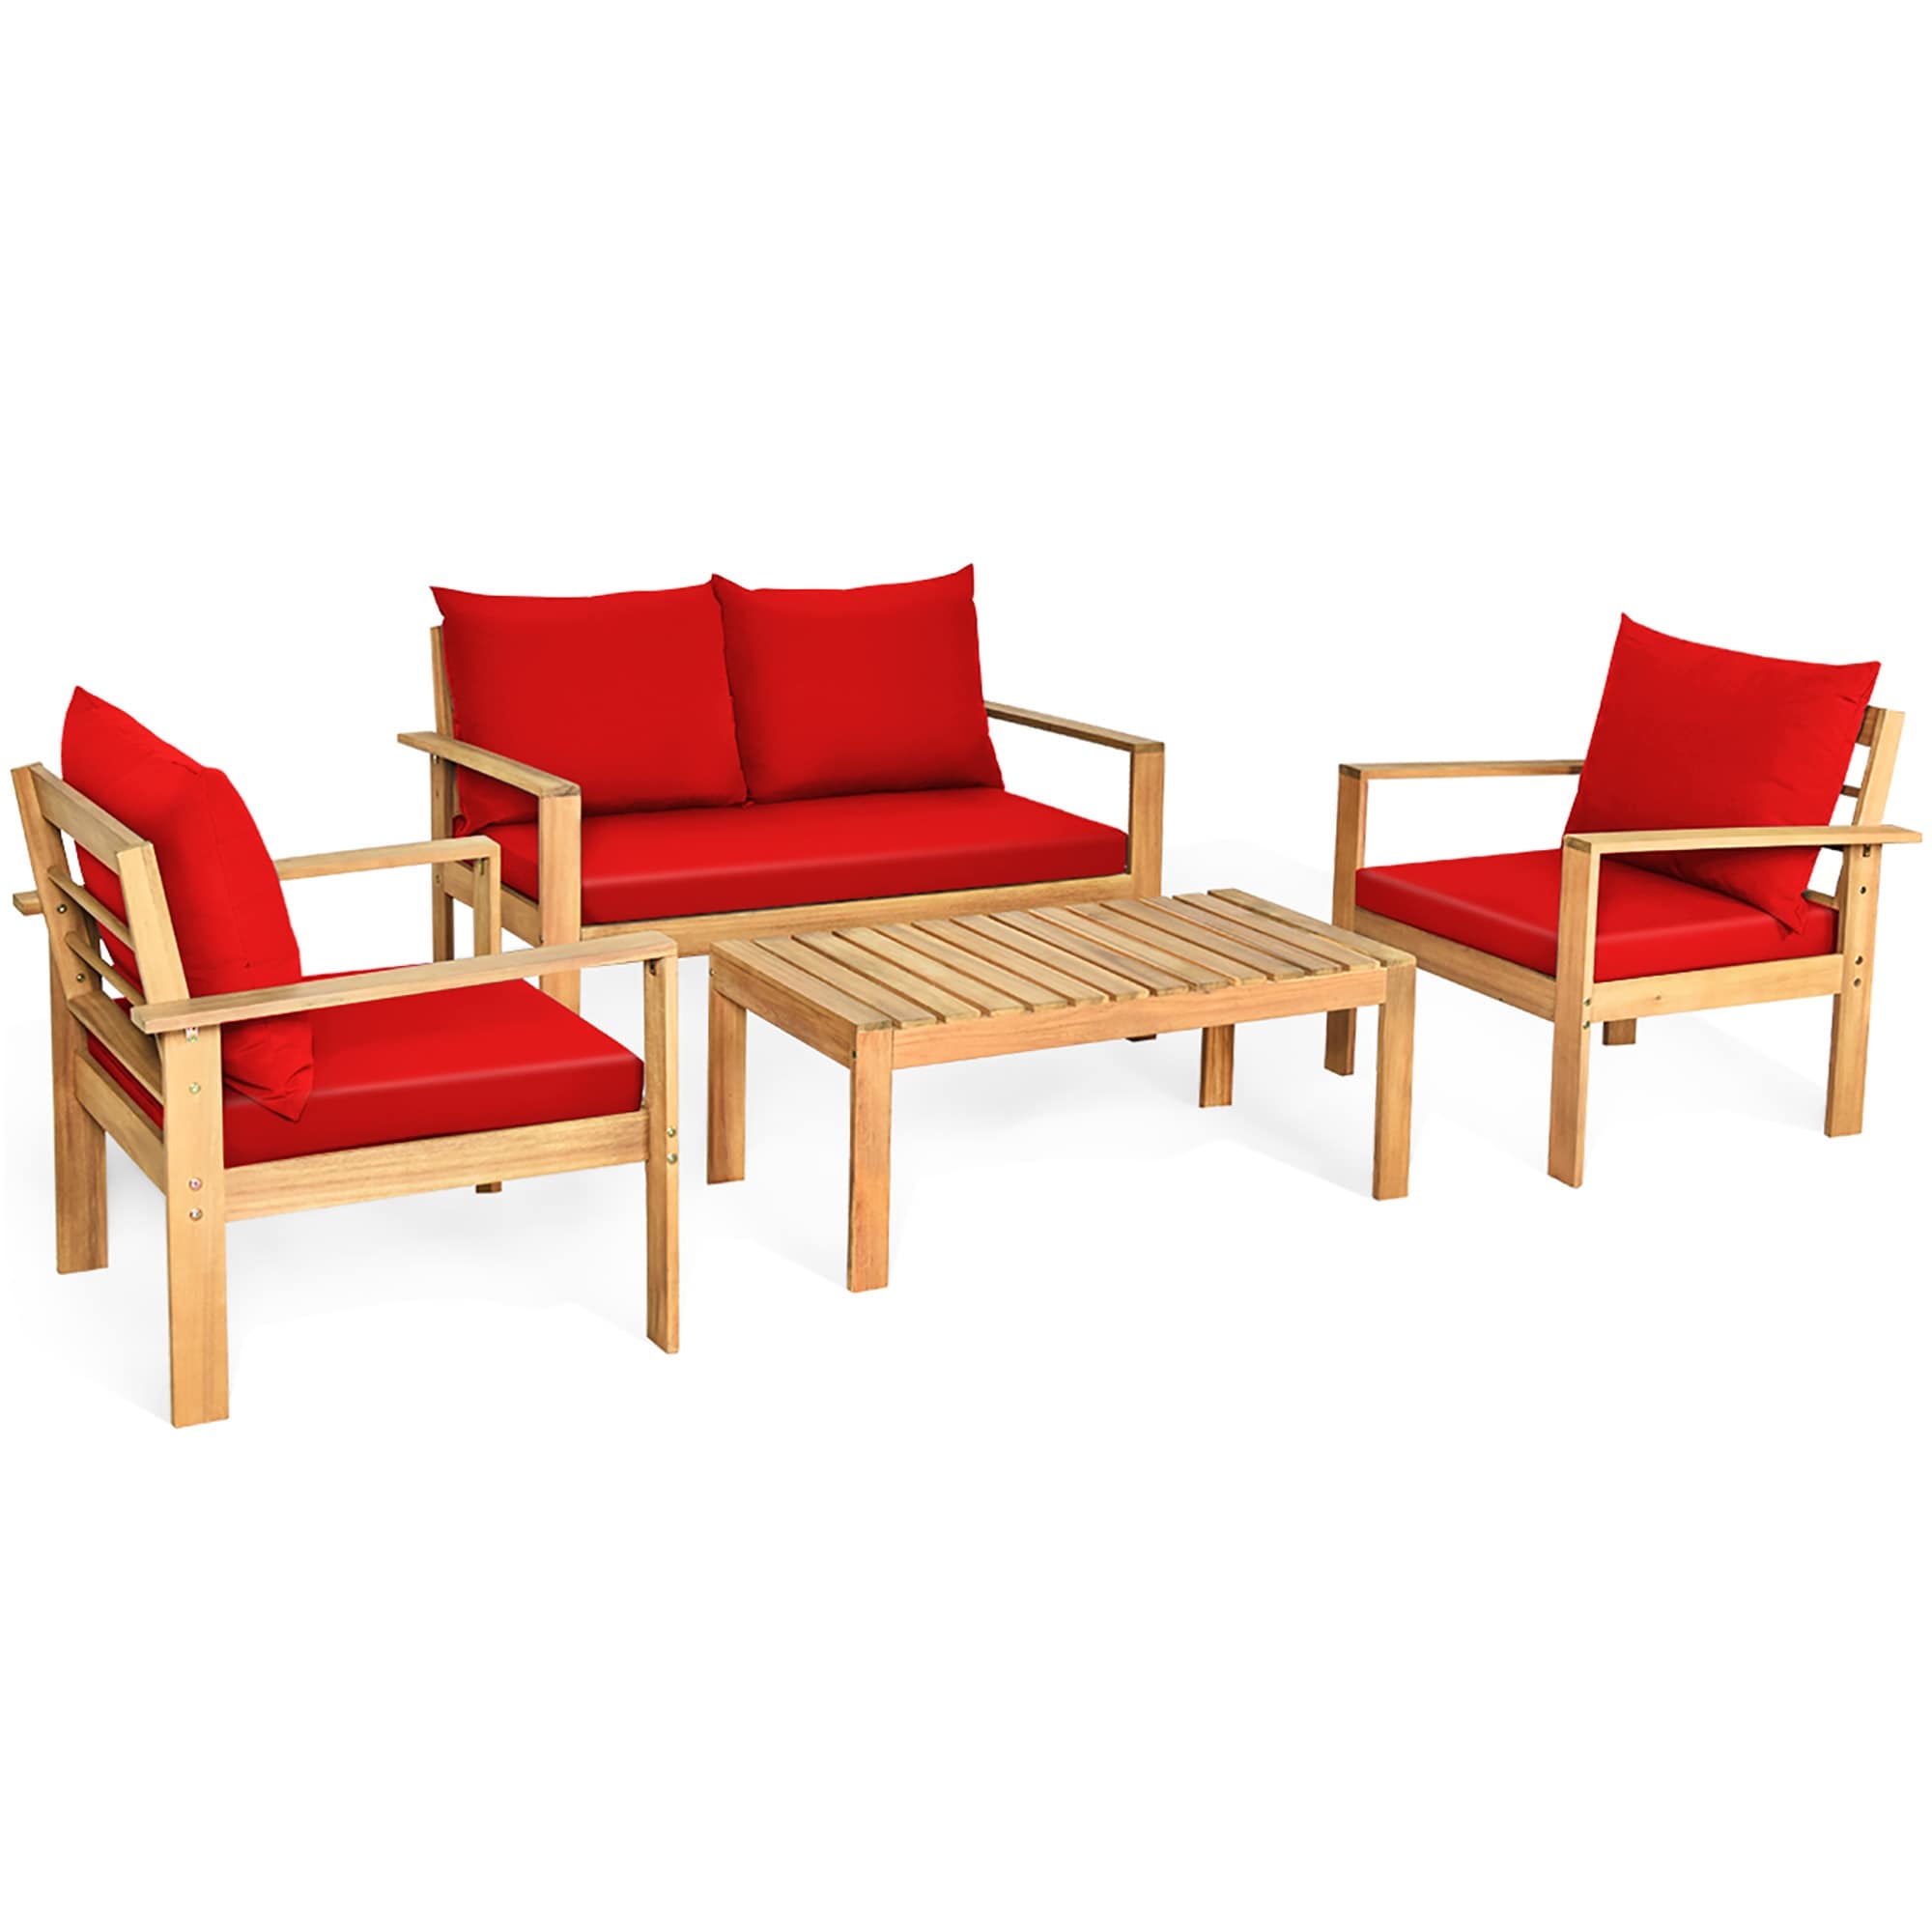 Outdoor 4 Piece Acacia Wood Chat Set Conversation Sofa And Table Set